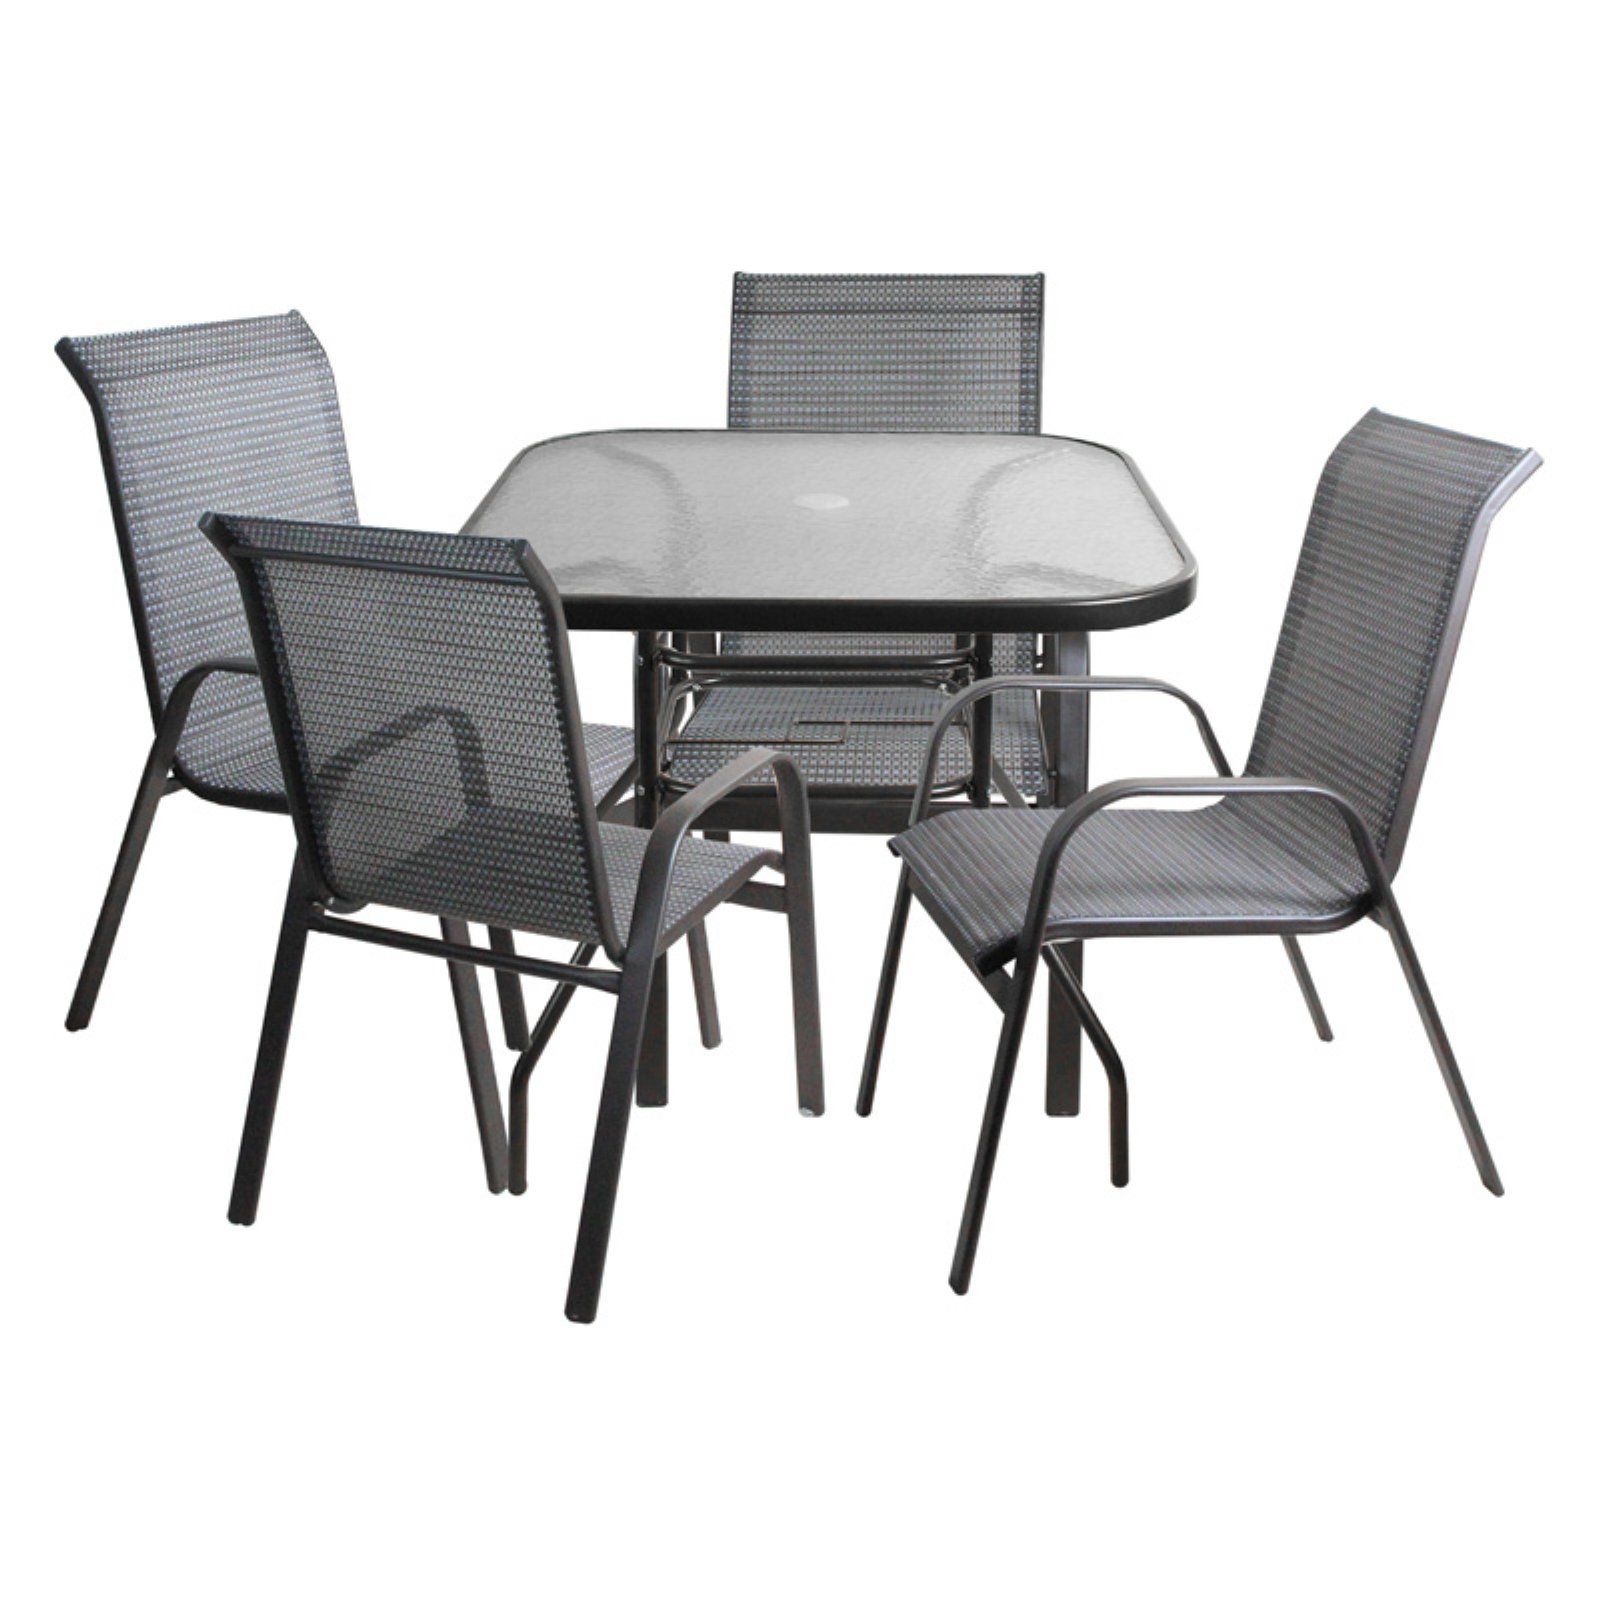 5 Piece Outdoor Seating Patio Sets Inside Favorite Cc Outdoor Living 5 Piece Outdoor Mesh Textilene And Steel Rectangle (View 14 of 15)